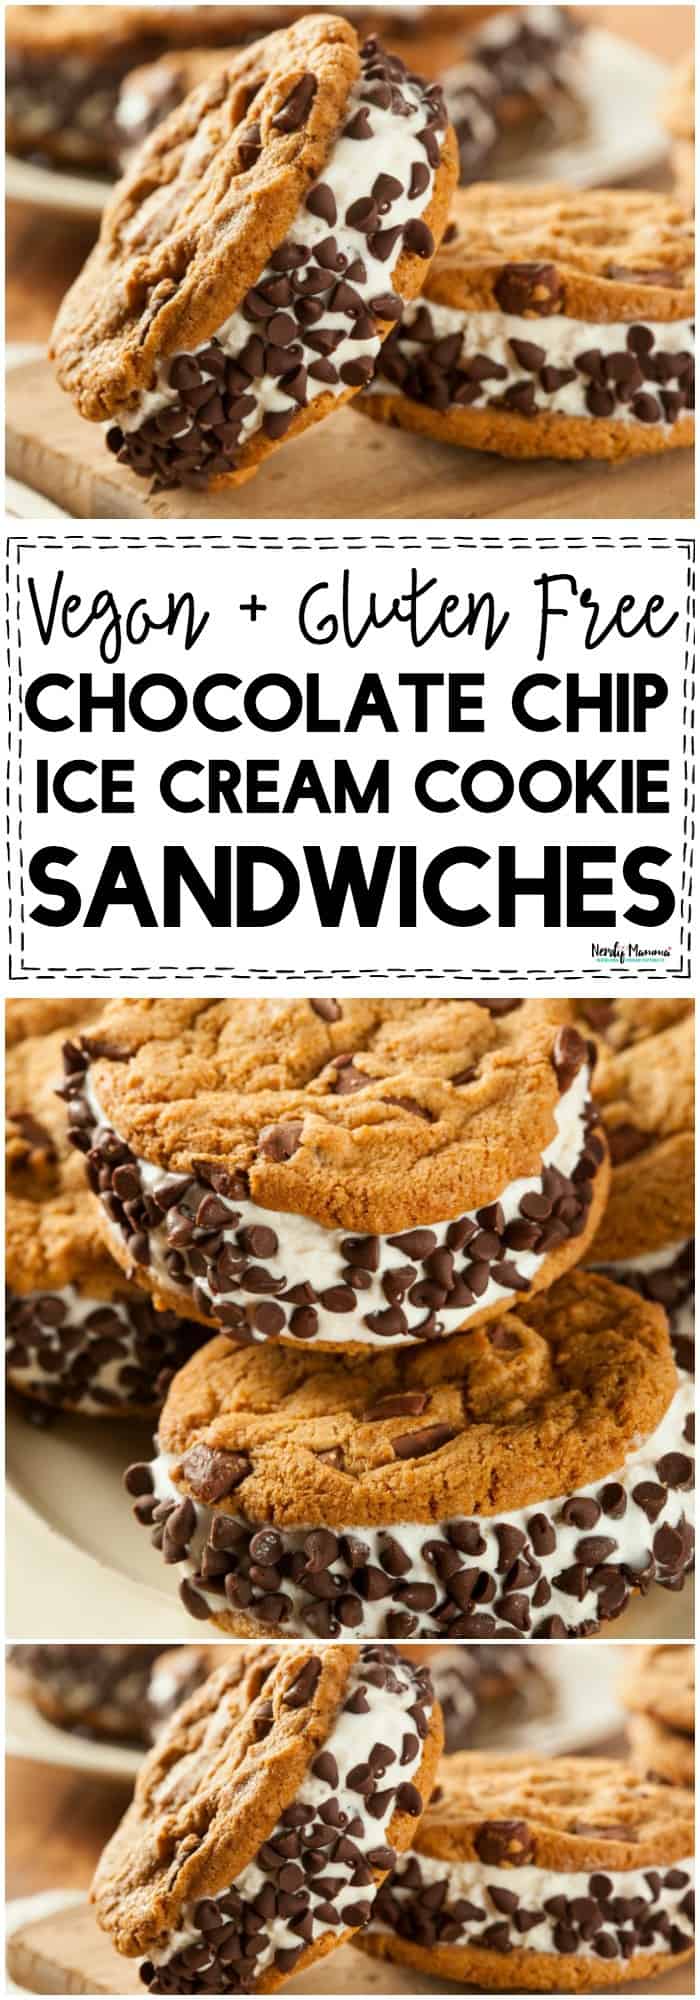 OMG You HAVE to try these vegan and gluten free chocolate chip ice cream cookie sandwiches! They're perfect for all summer long!